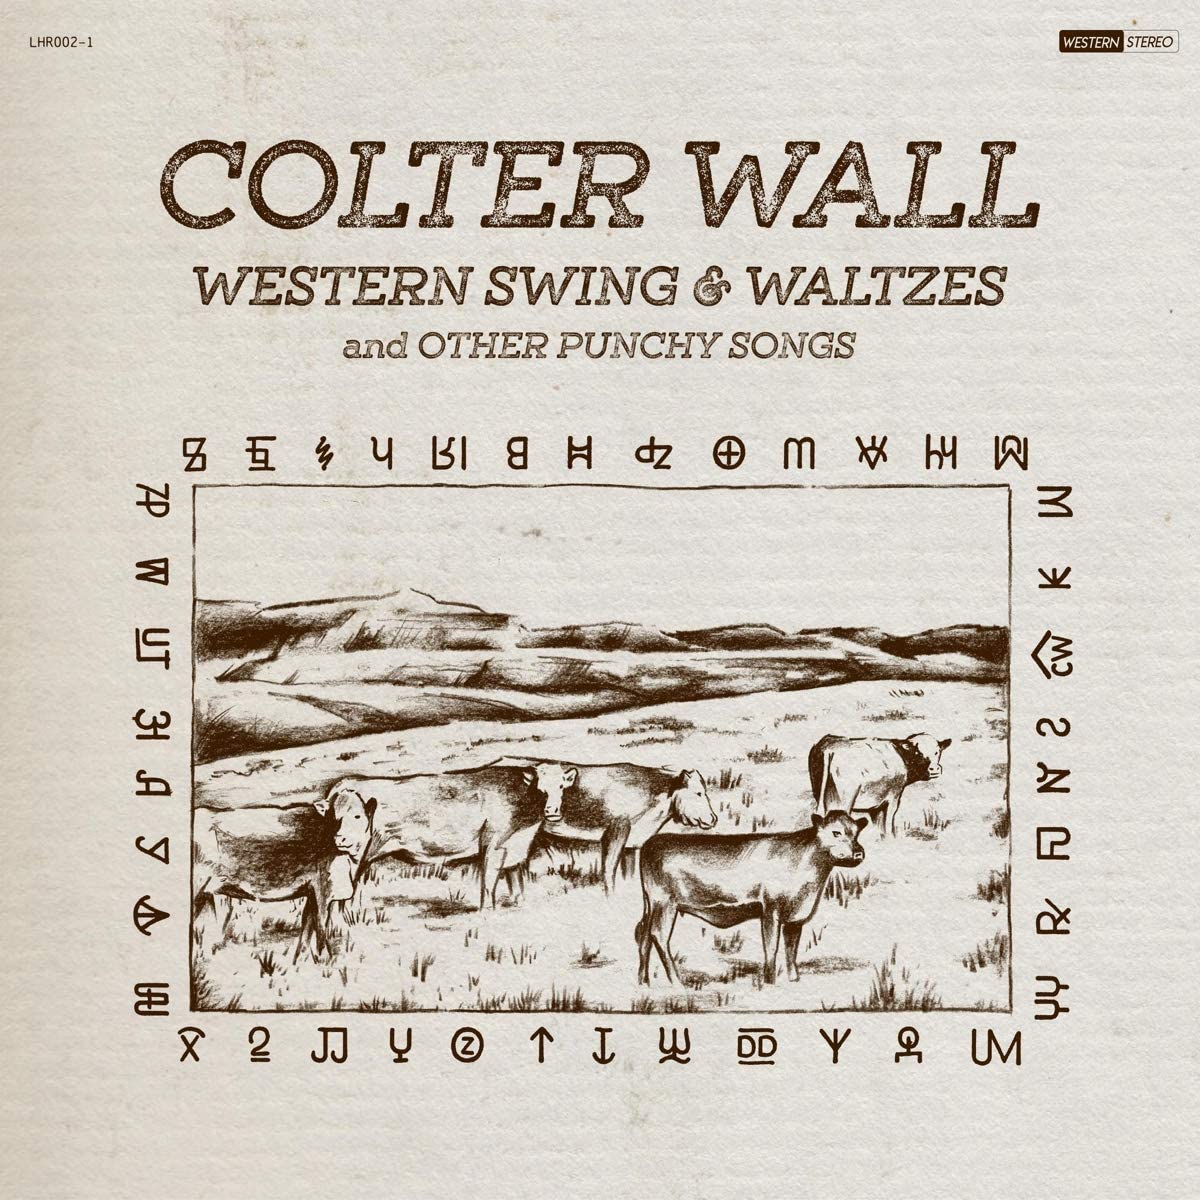 LP - Colter Wall - Western Swing & Waltzes And Other Punchy Songs